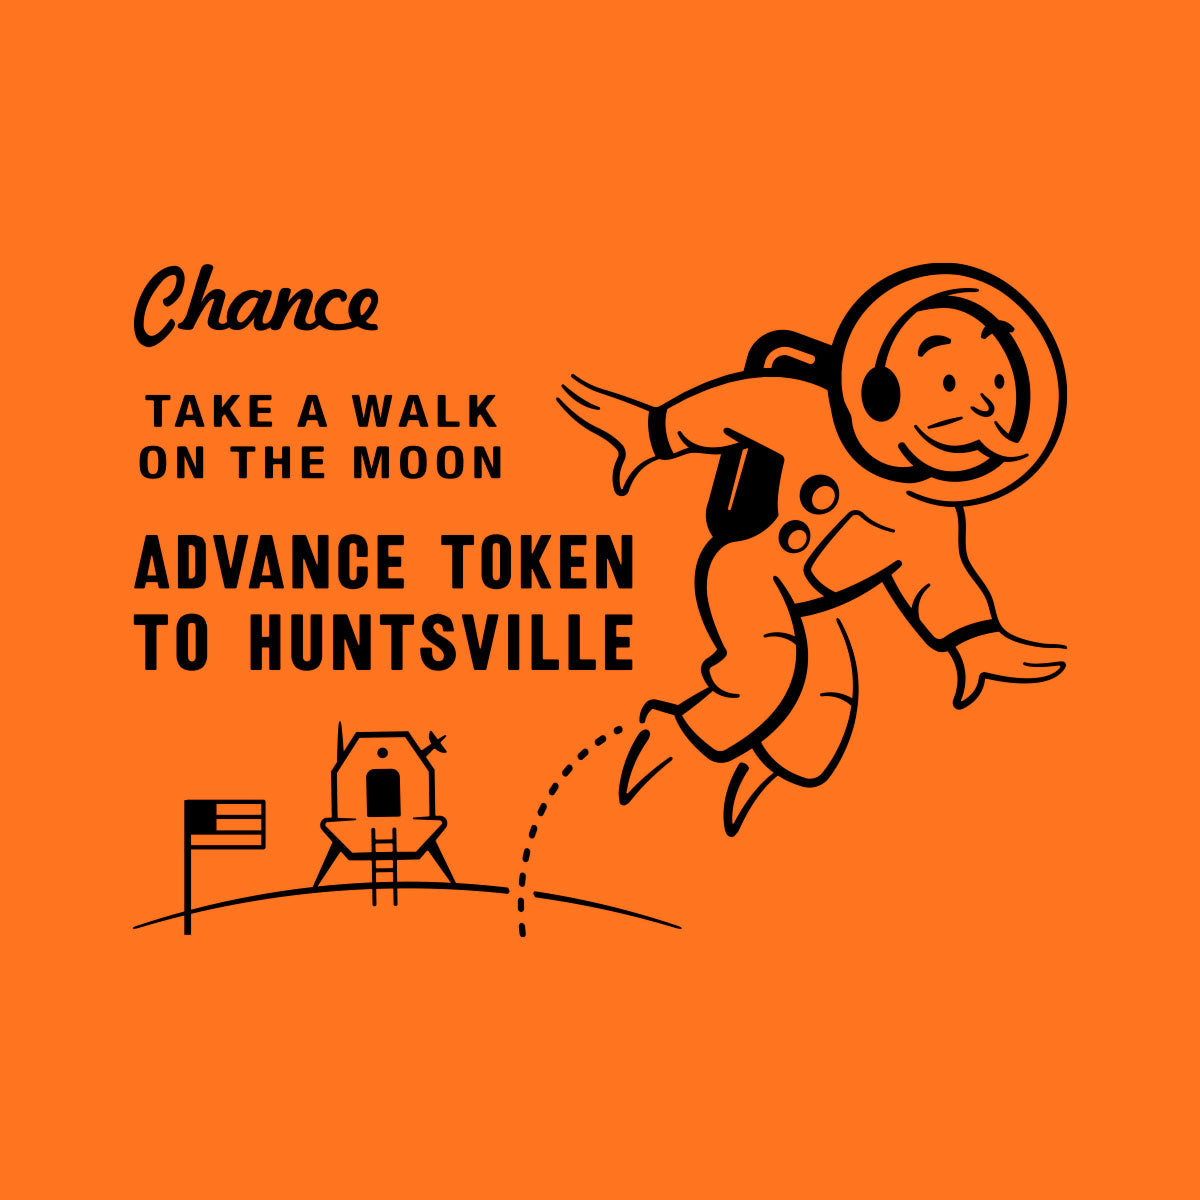 Thumbnail of Monopoly man on the moon with text " Chance; Take a walk on the moon; Advance token to Huntsville" on orange background